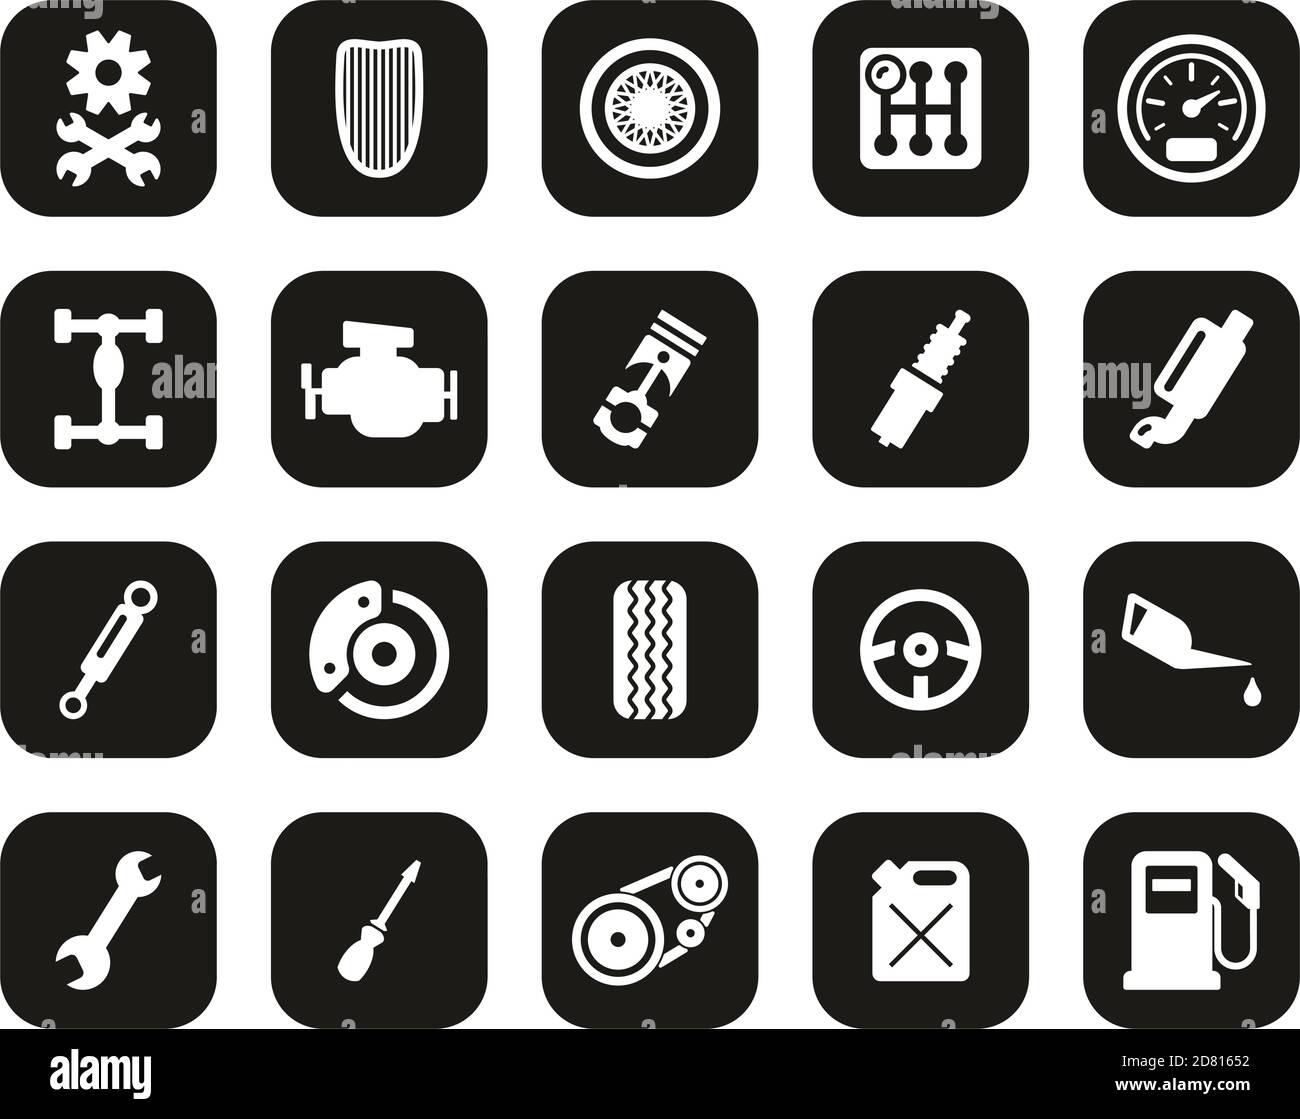 Hot Rod Culture & Parts Icons White On Black Flat Design Set Big Stock Vector